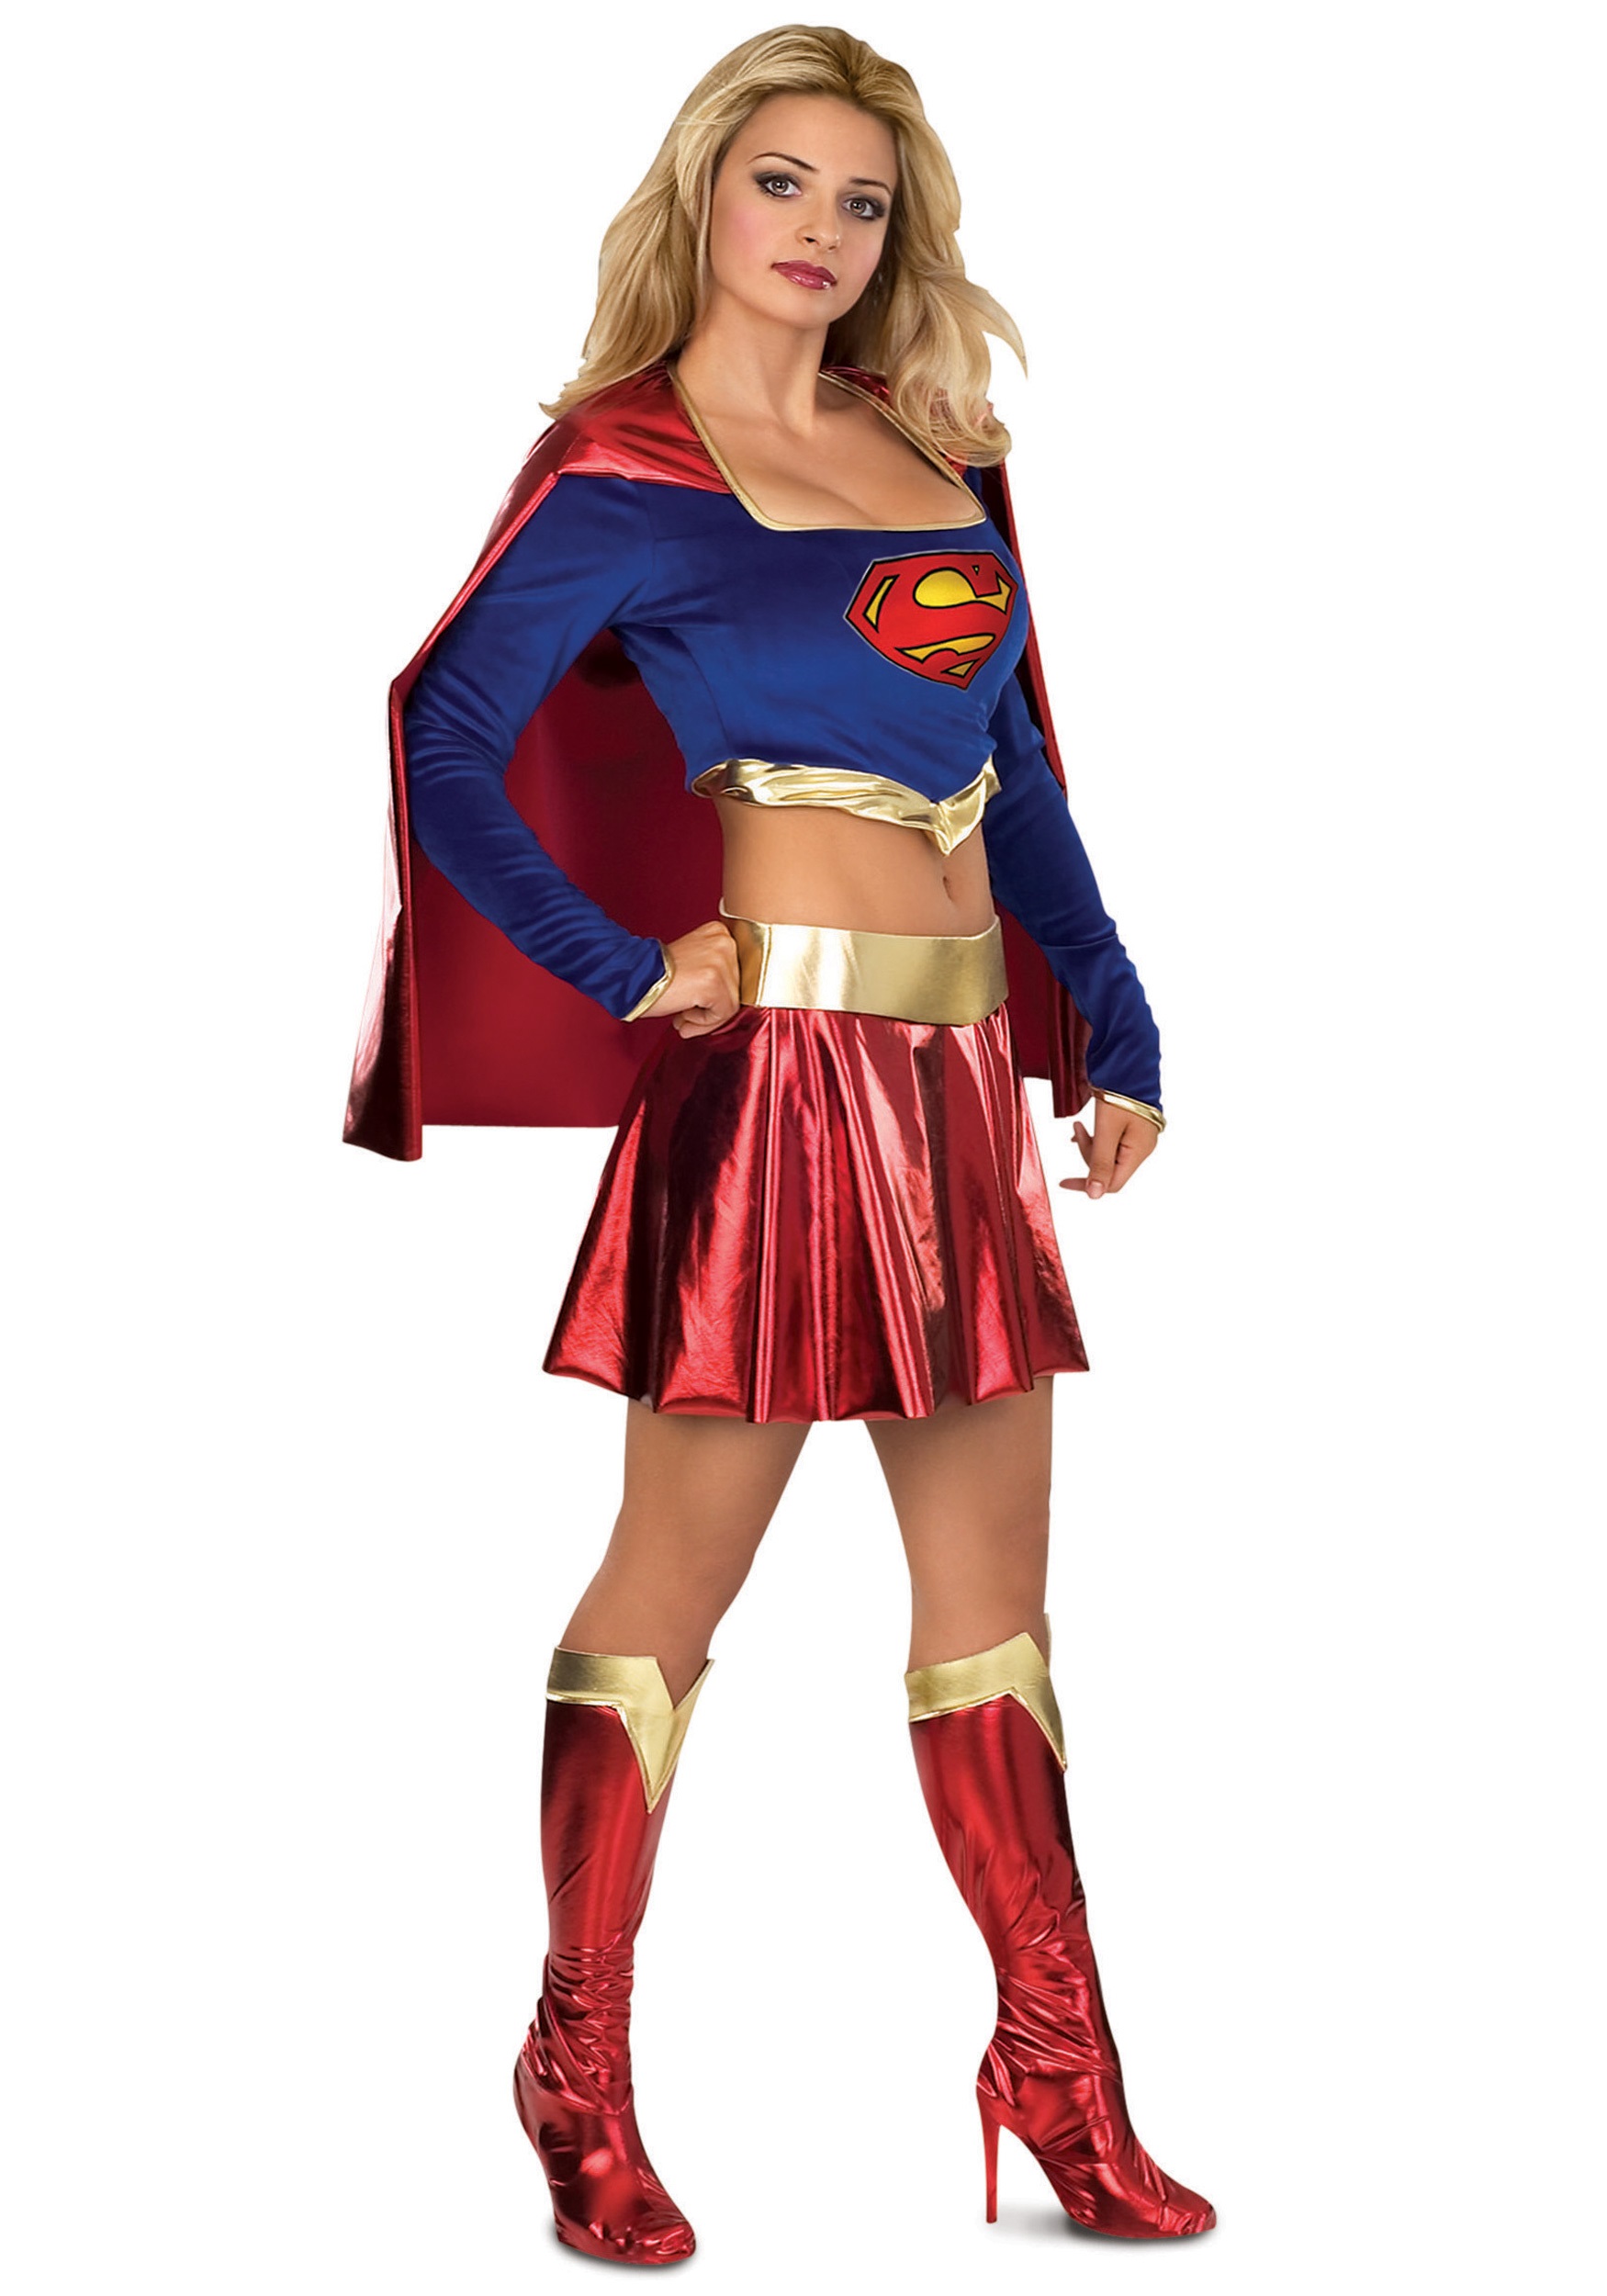 This sexy Supergirl costume brings the kind of superhero style that gives y...